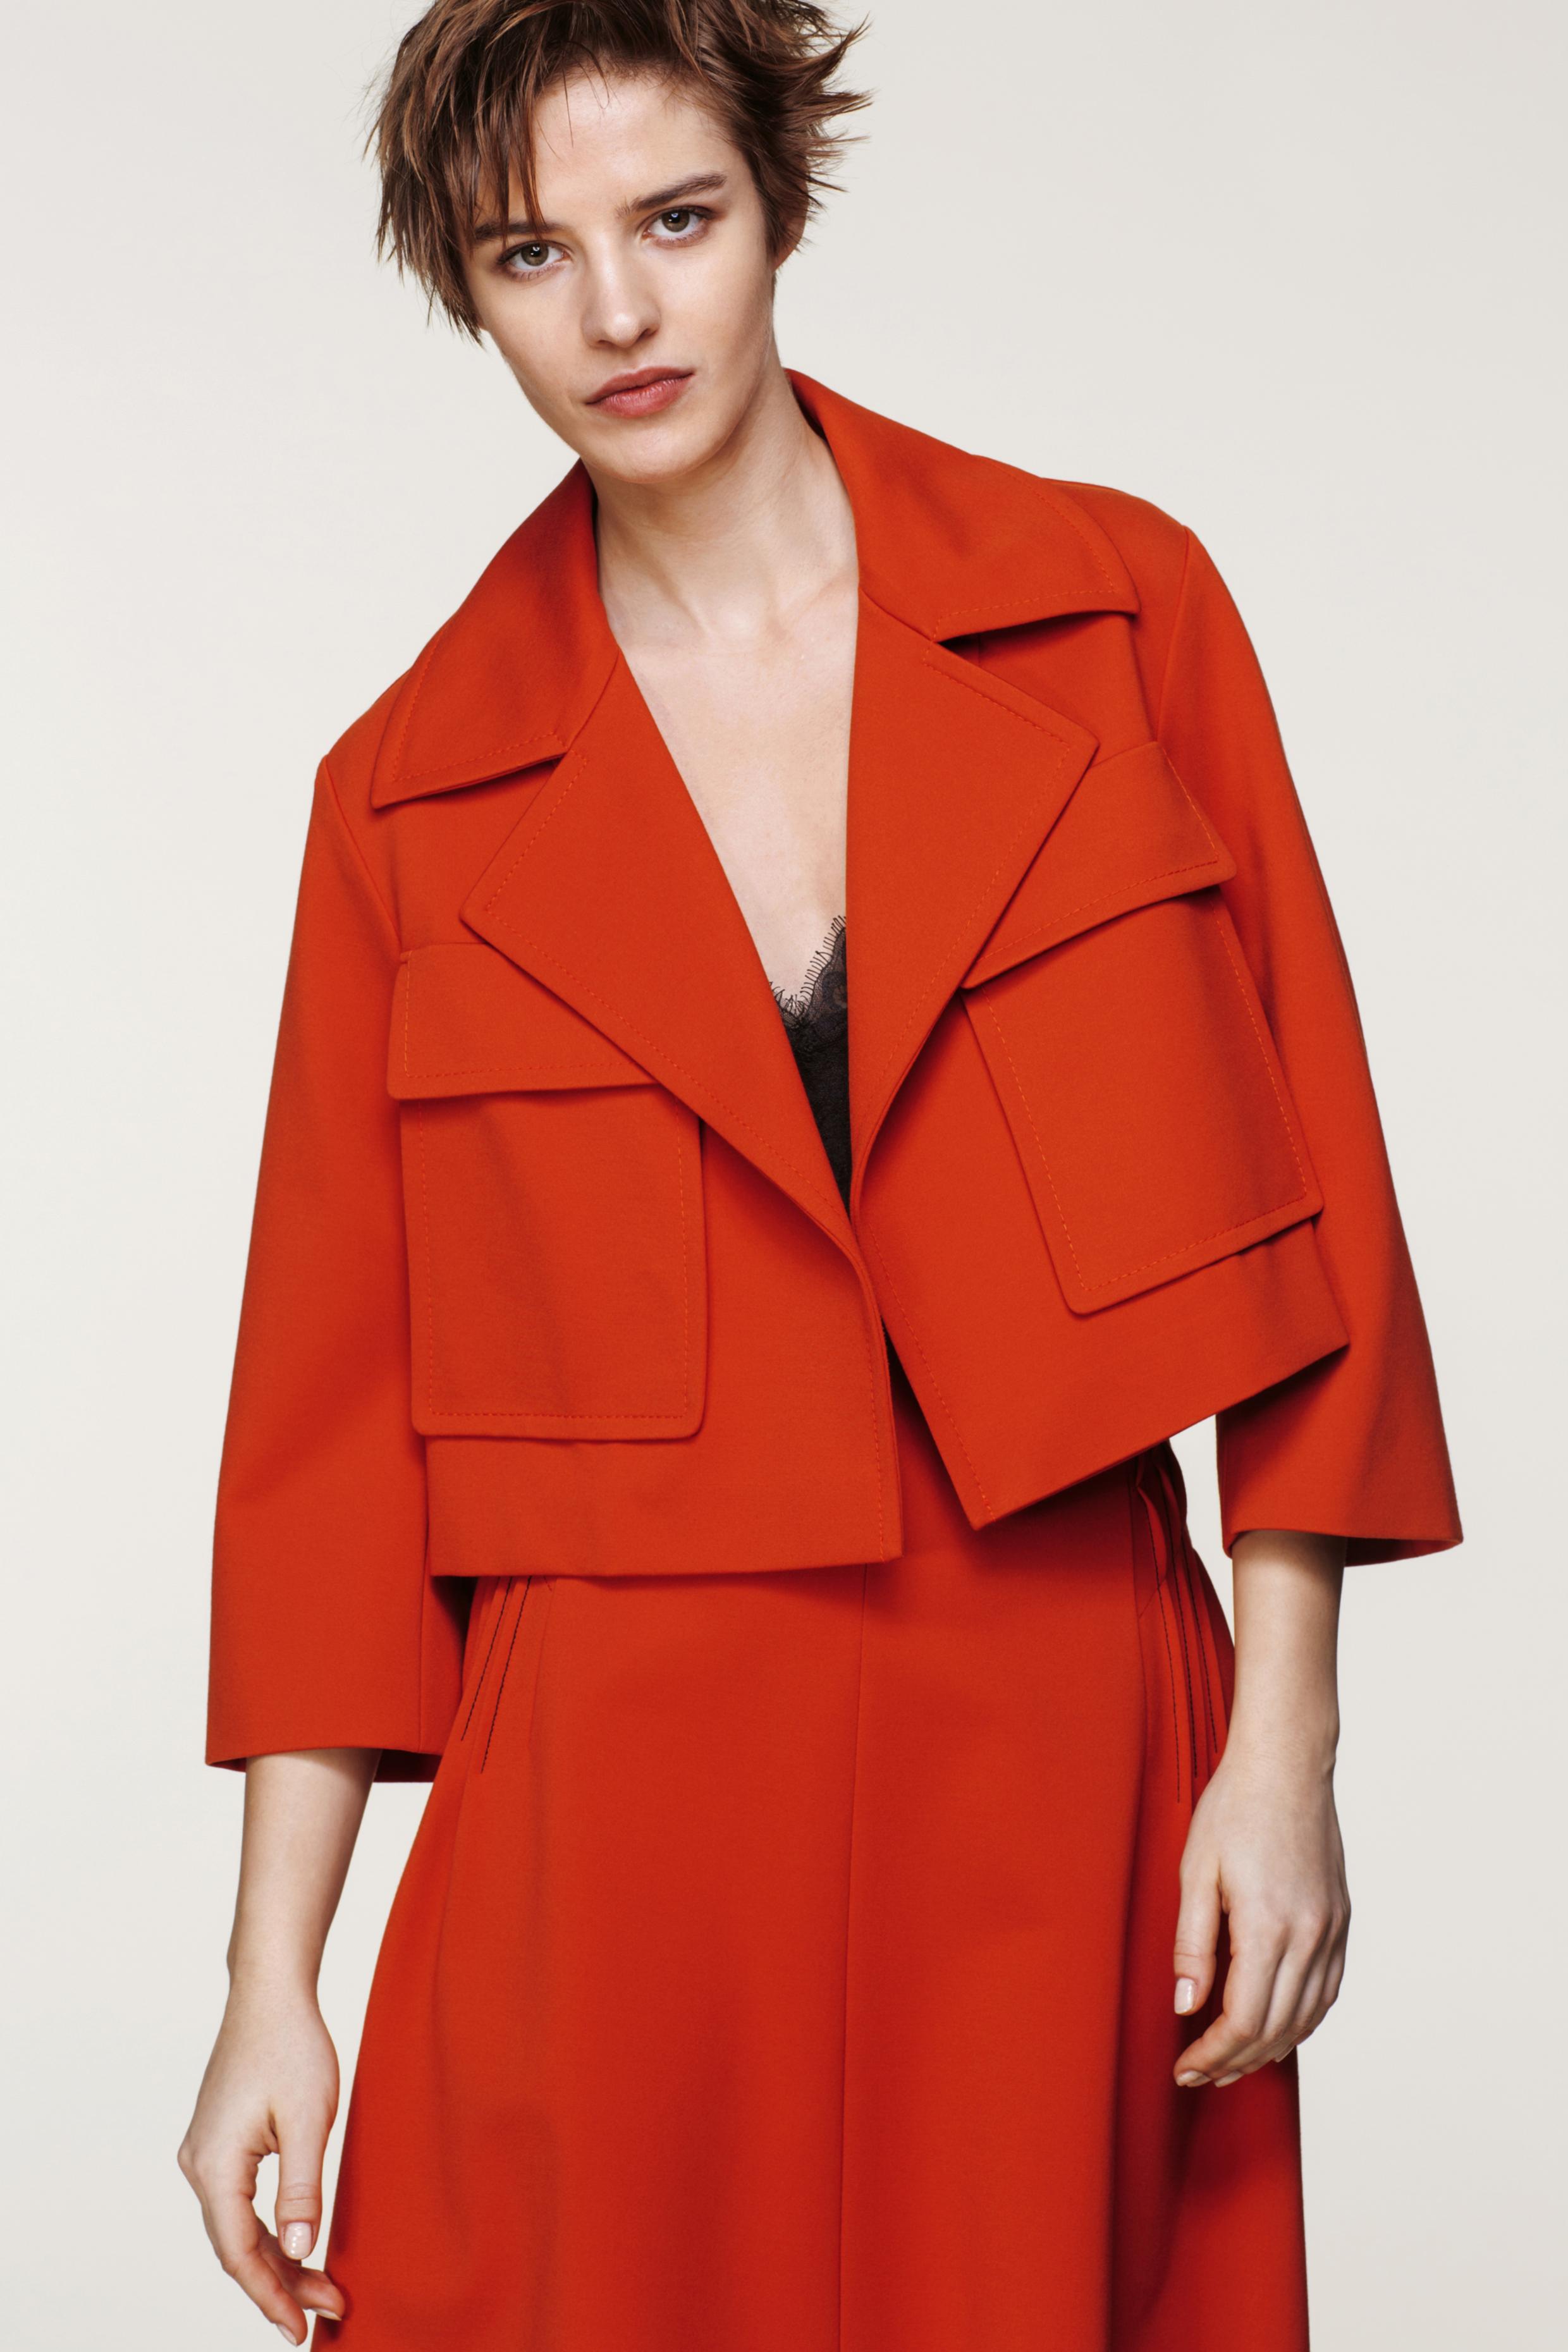 Dorothee Schumacher Synthetic Emotional Essence Jacket in Red - Lyst